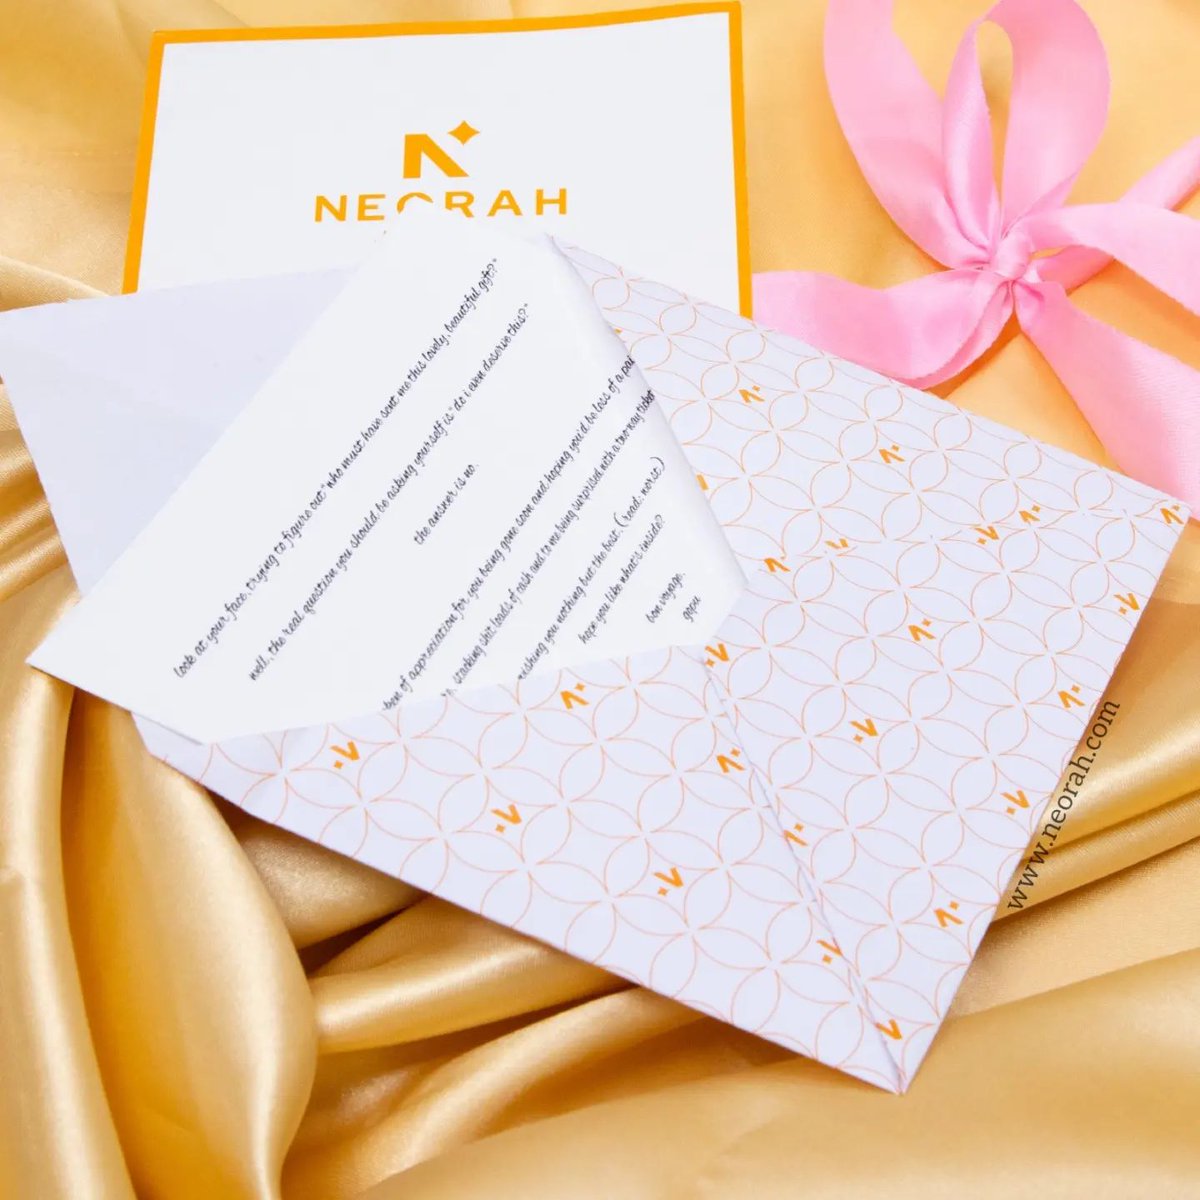 A little surprise to show you how much your loved one mean to you 💓

Celebrate the beautiful bond with a personalised wishcard from Neorah ,
🛒neorah.com

#atelierneorah #wishcards #personalisation #planner #journals #bags #wallets #custommade #personalisedlove